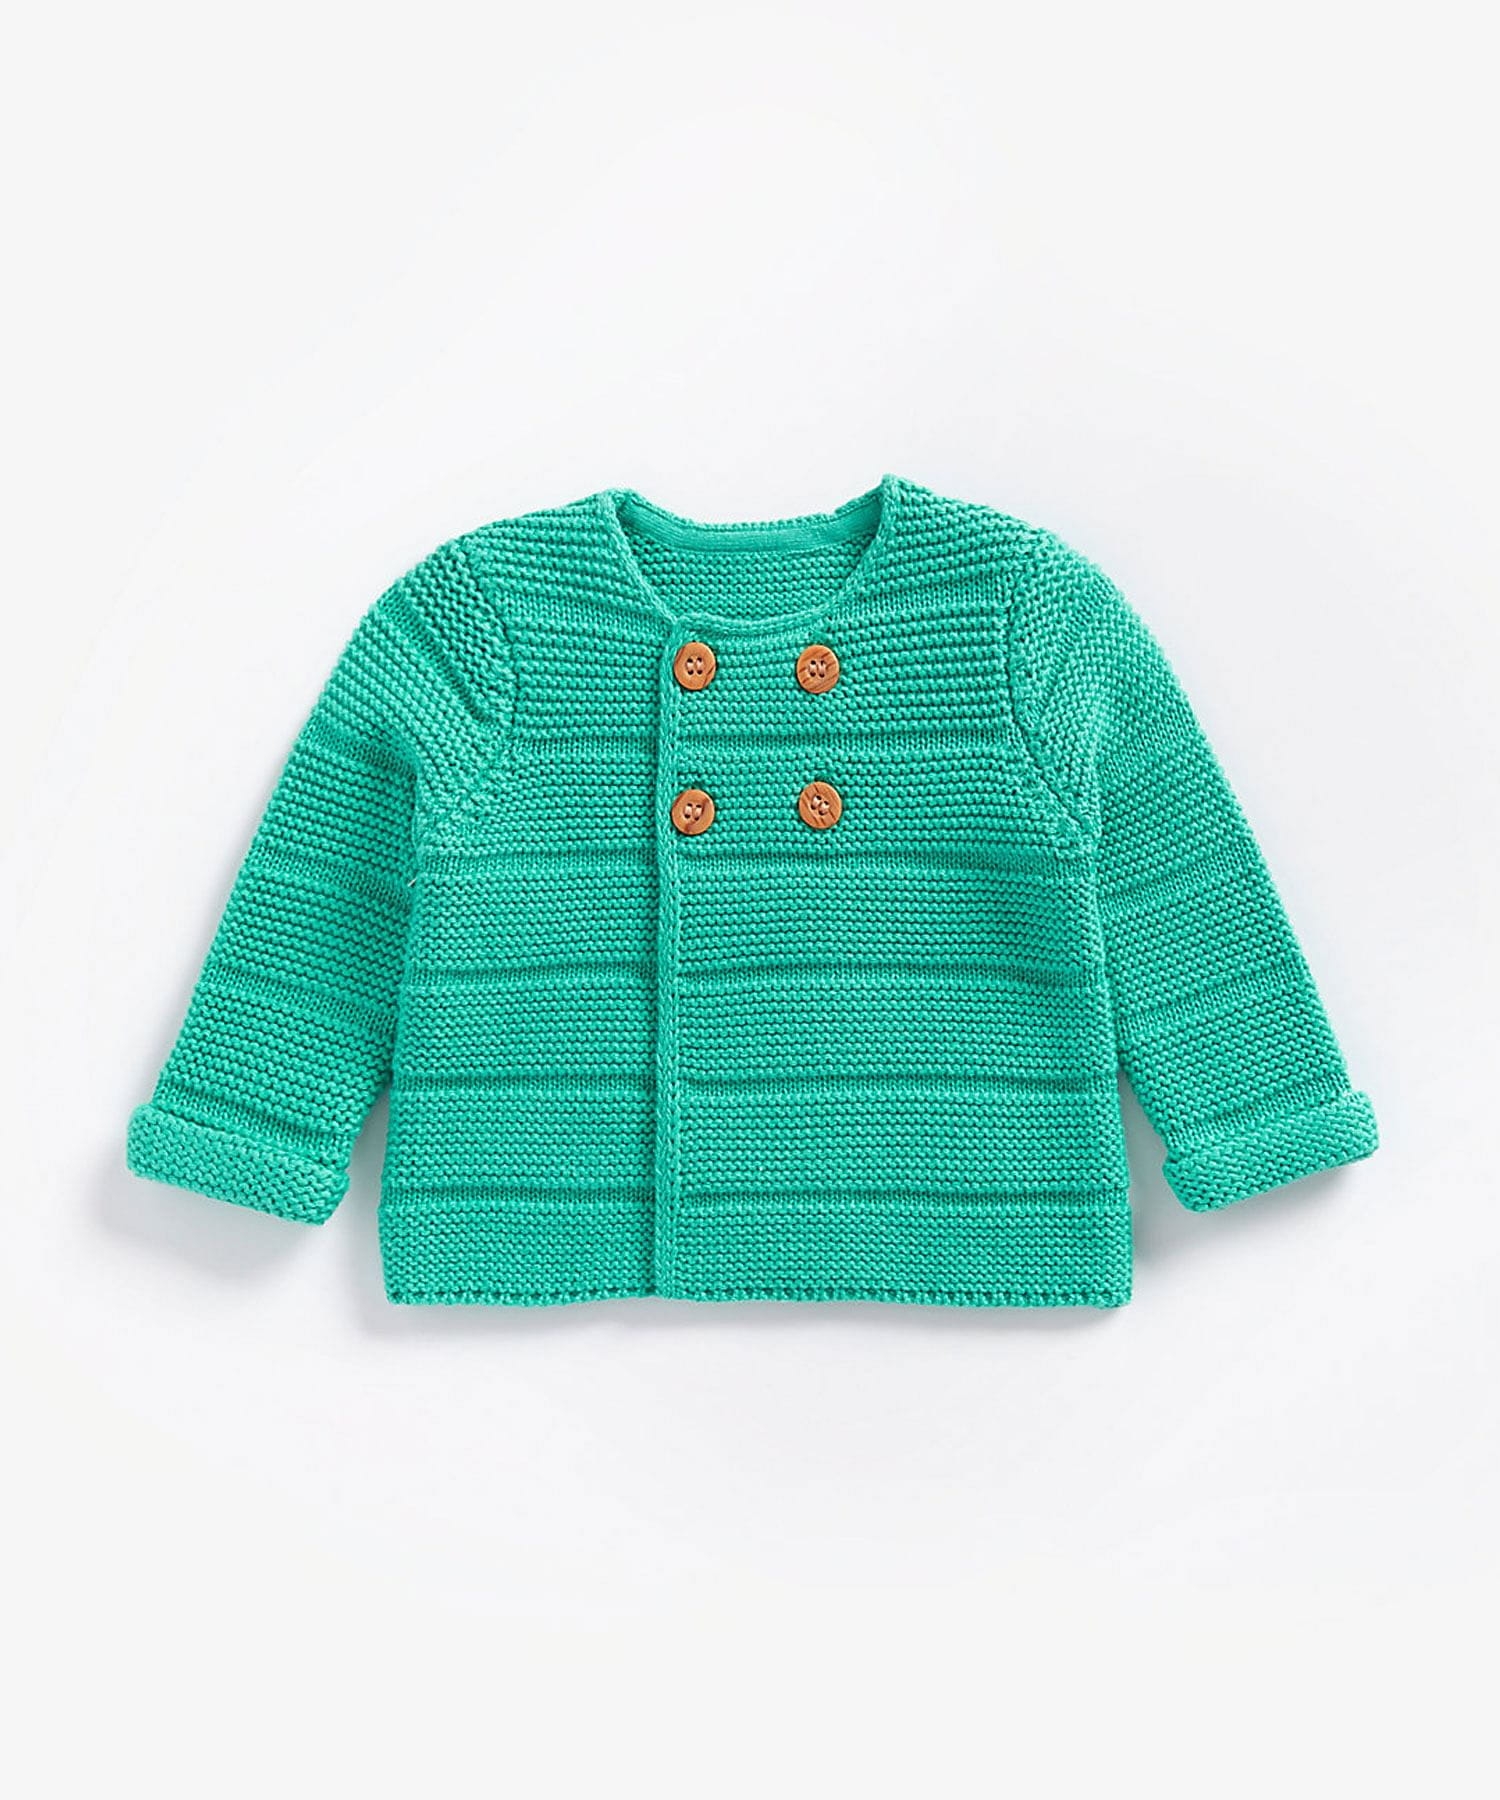 Mothercare | Boys Full Sleeves Cardigan With Button Fastening - Green 0